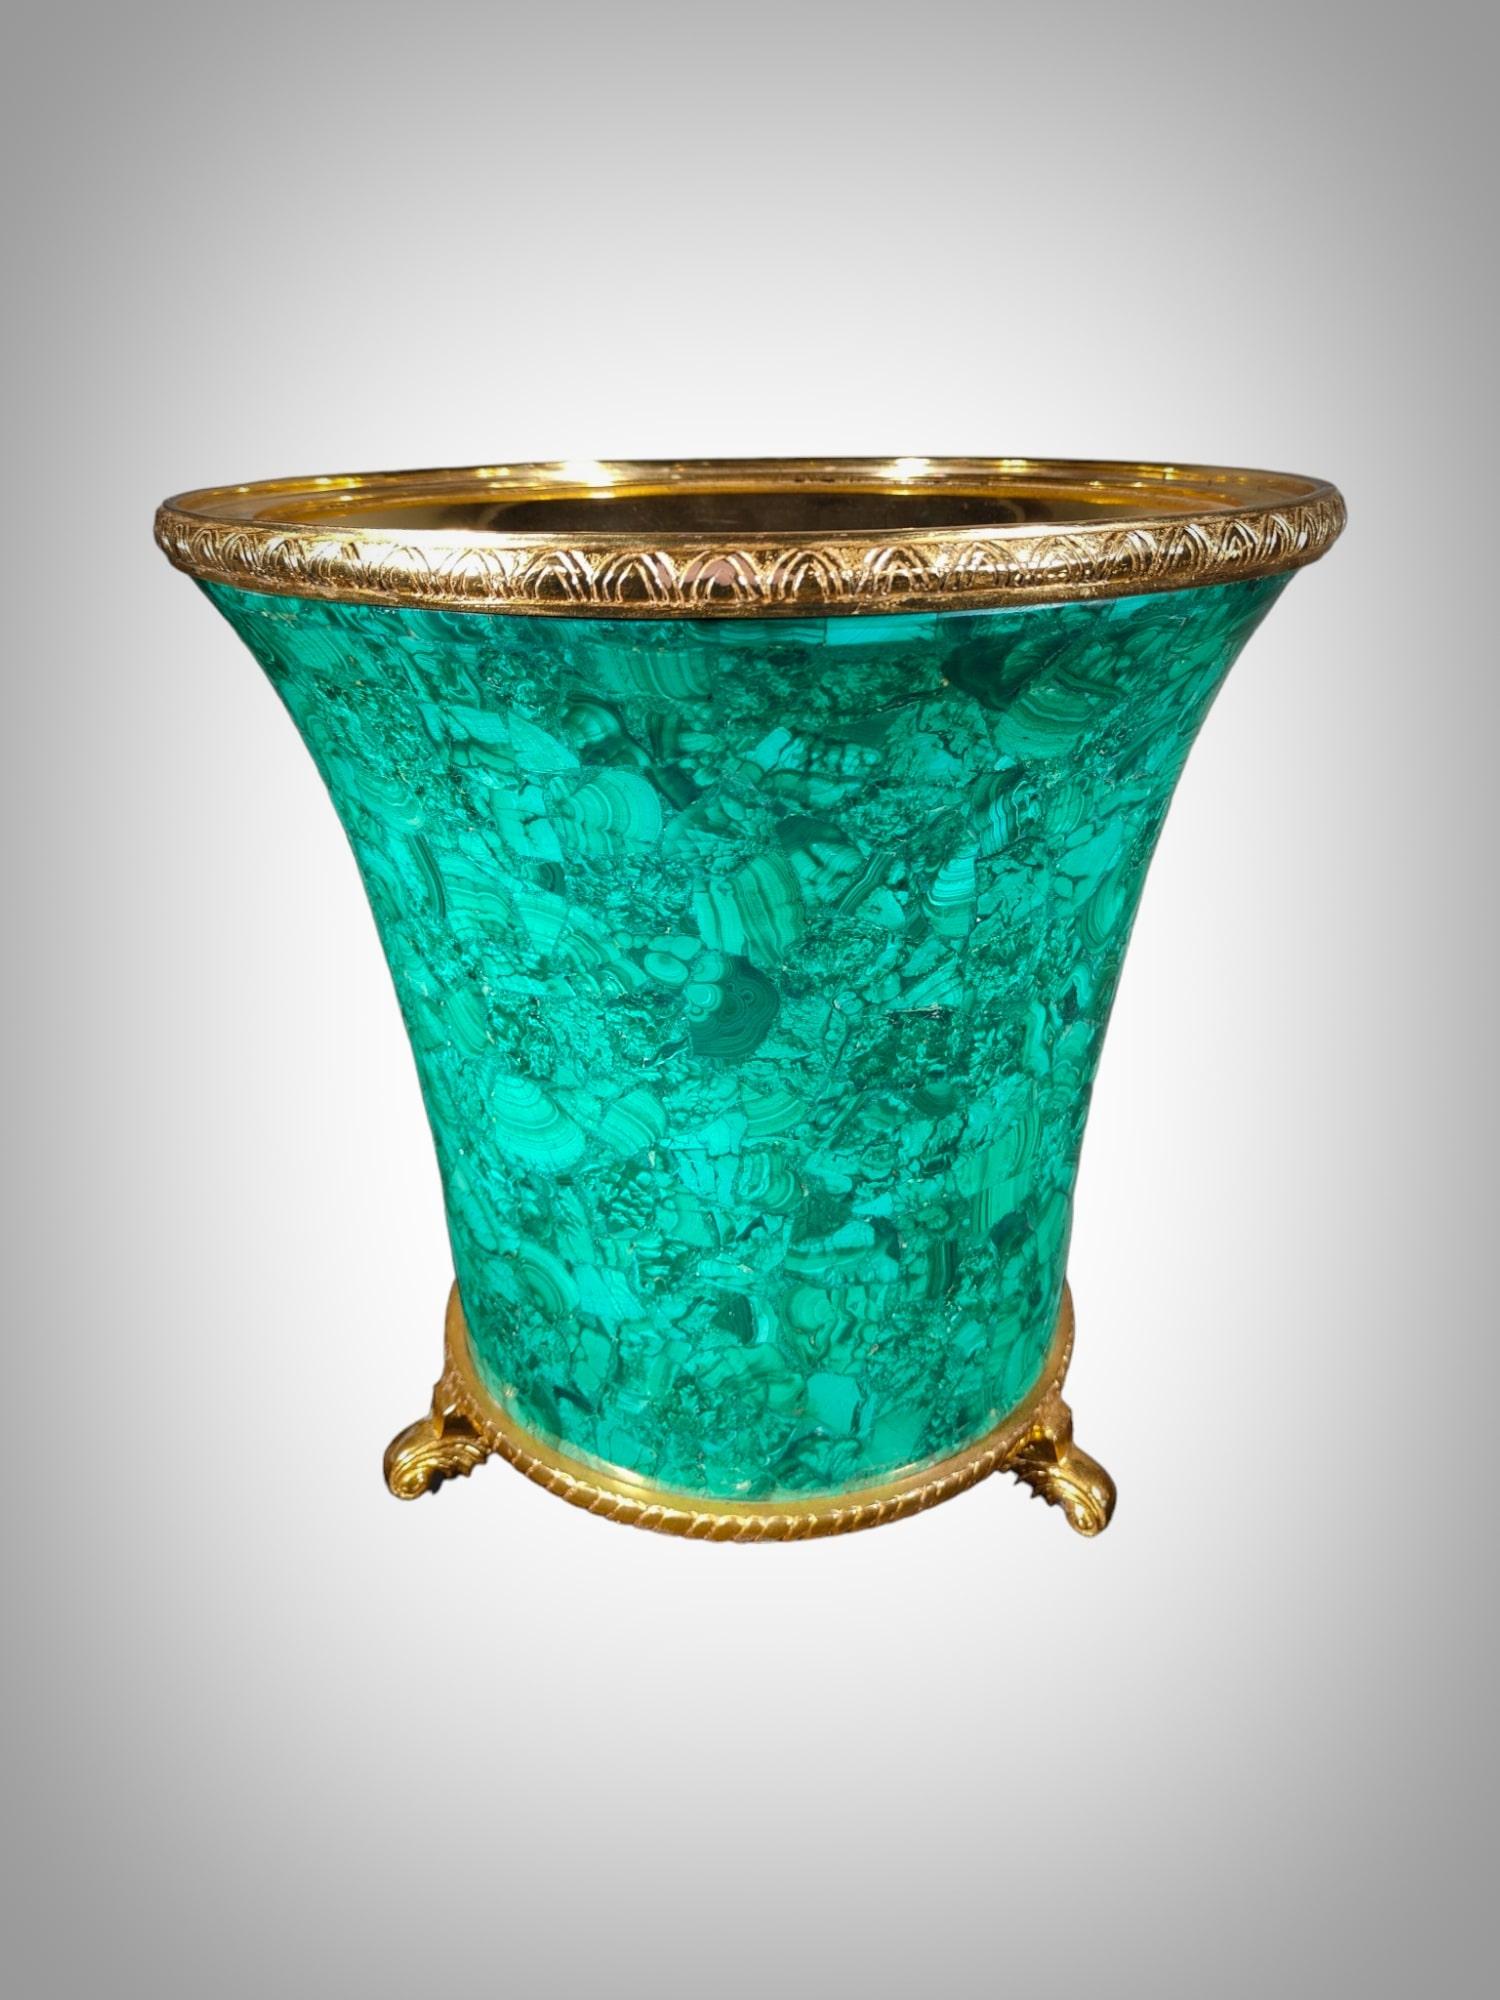 Spectacular 1950s Wine Cooler in malachite For Sale 2